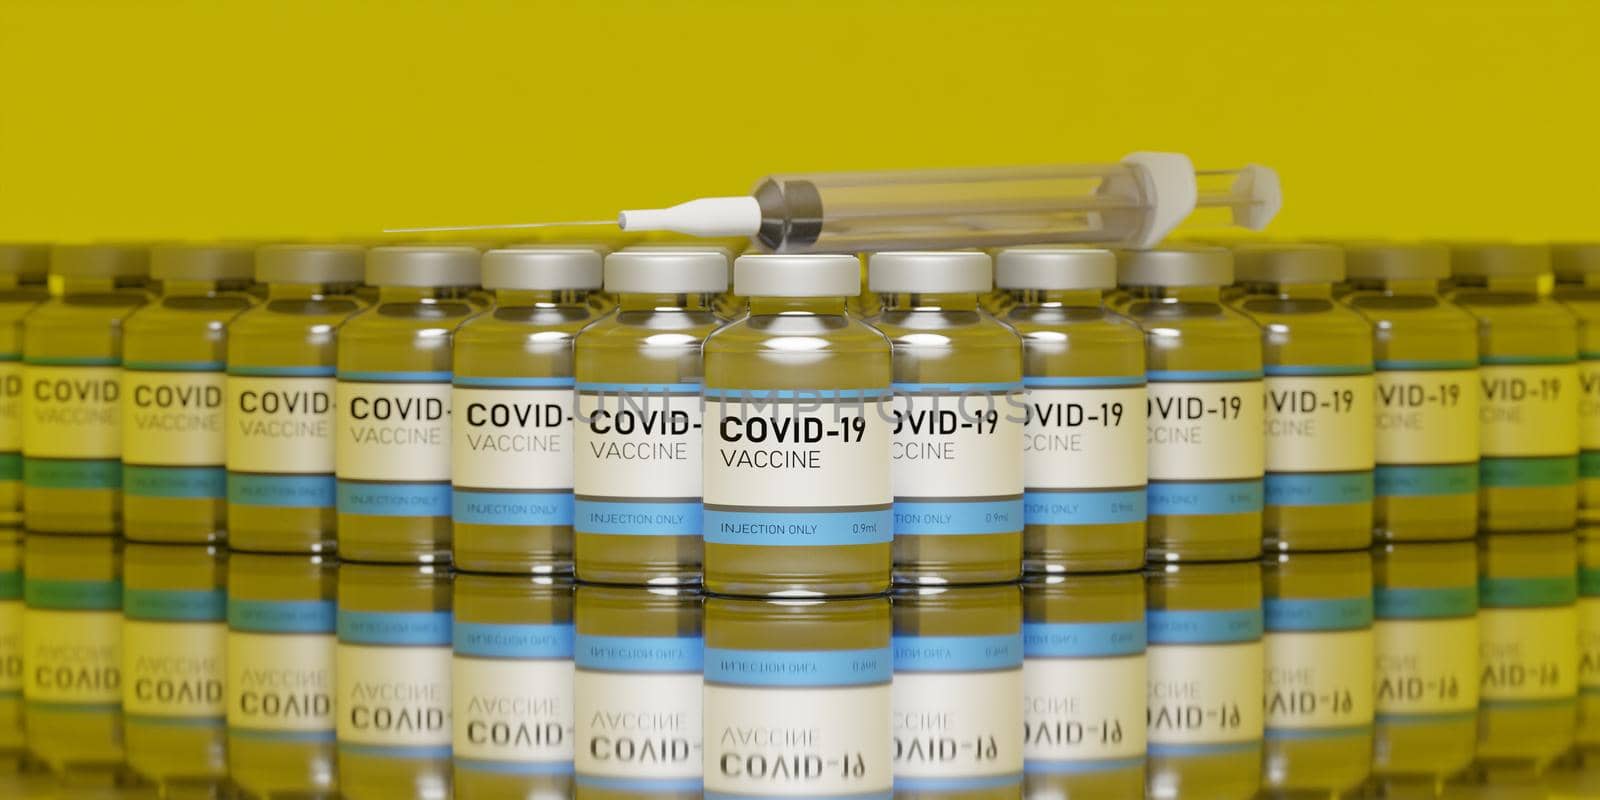 MANY CORONAVIRUS VACCINES LINED UP WITH A SYRINGE ON A GLASS TABLE WITH REFLECTIONS AND A YELLOW BACKGROUND